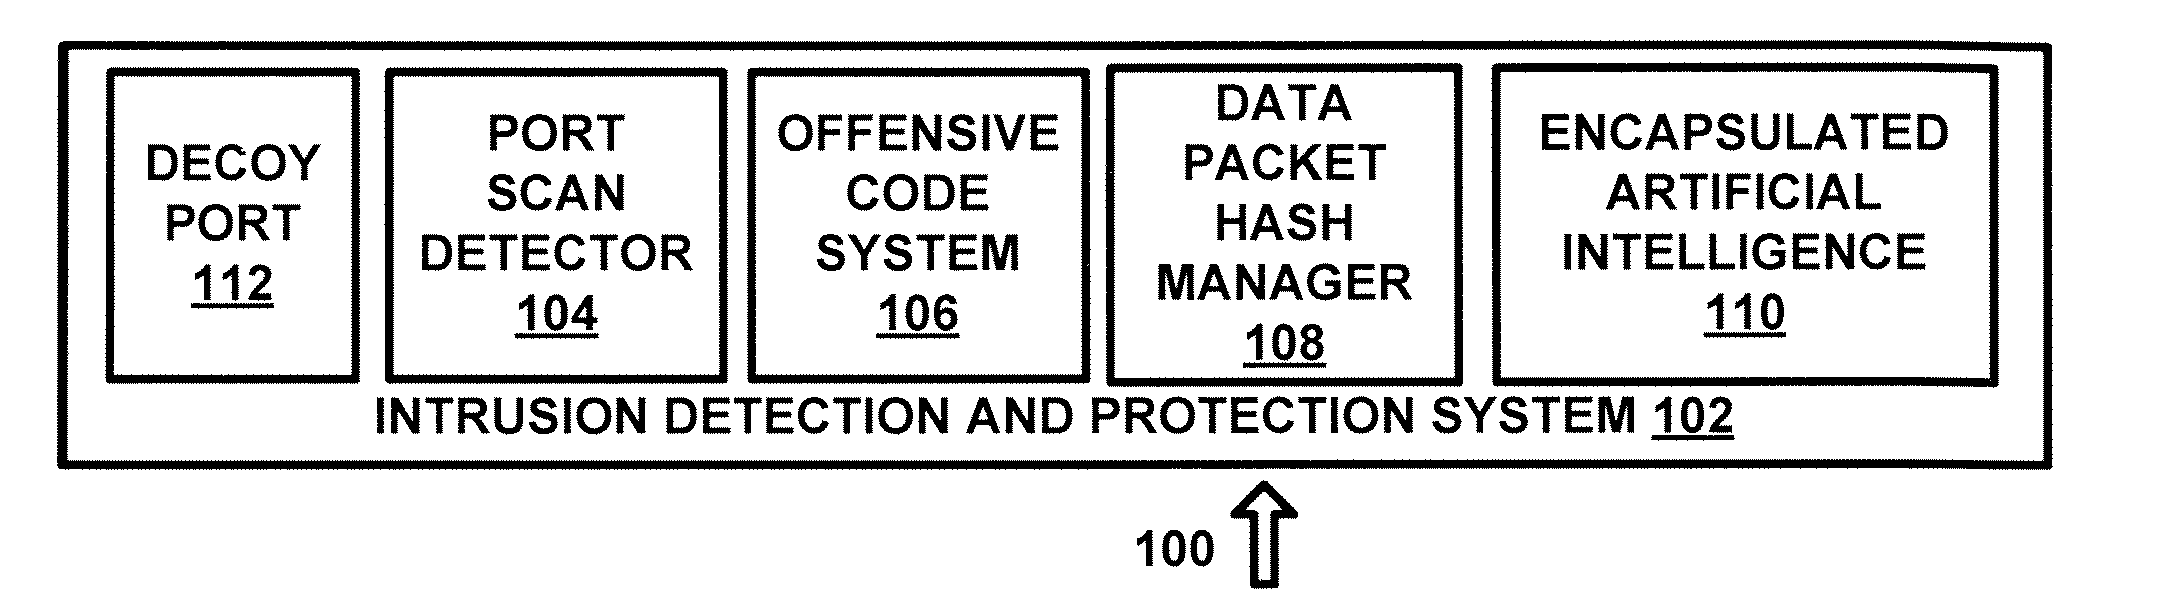 System and method for intrusion detection and suppression in a wireless server environment